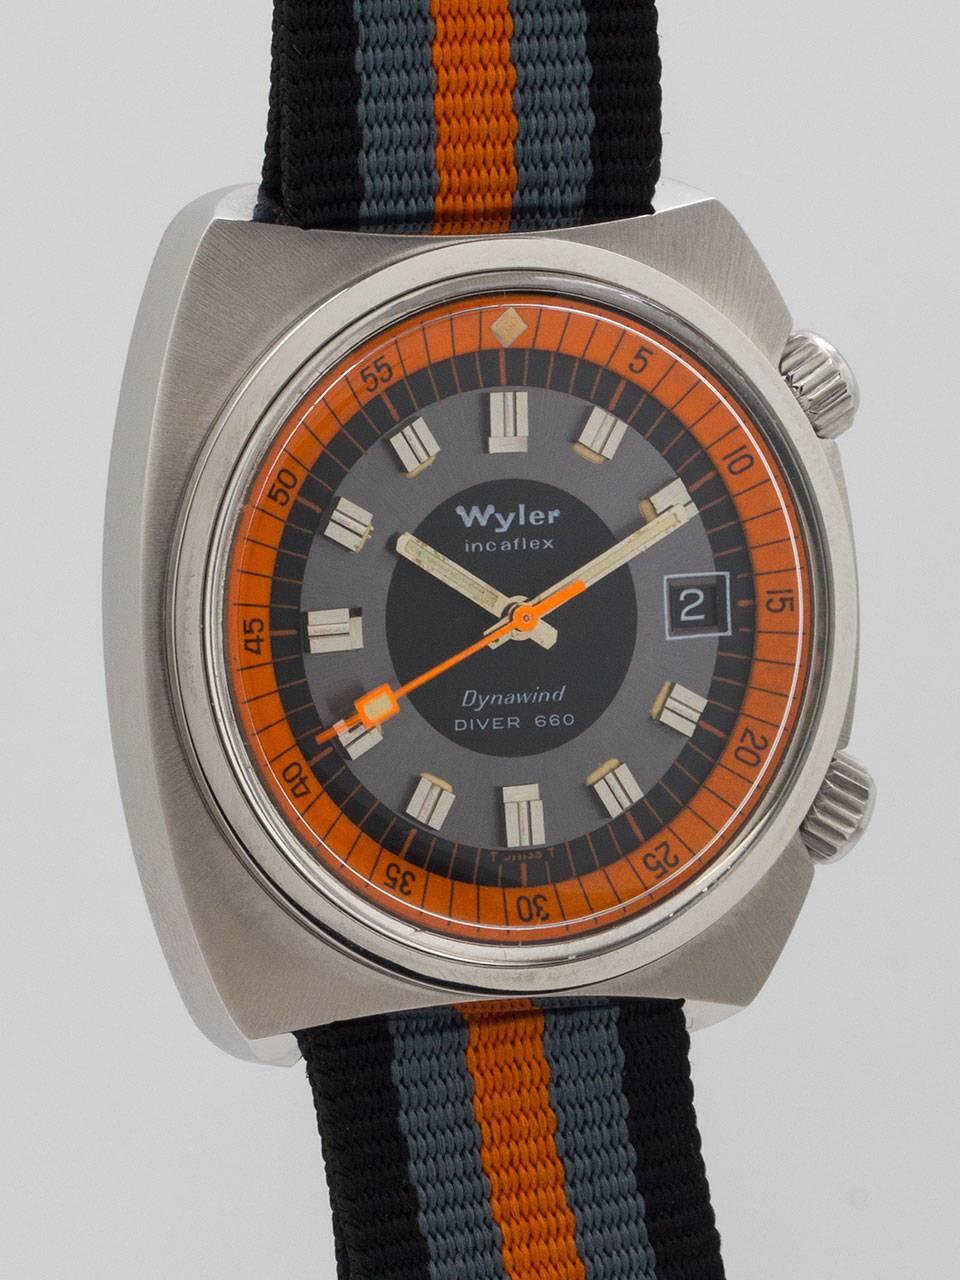 Wyler Stainless Steel Dynawind Divers 660 Wristwach circa 1960s. Great condition bowed tonneau shaped case with screwed back, dual crowns, top crown to advance inner rotating bezel. Beautiful condition original “target” pattern dial with bold black,